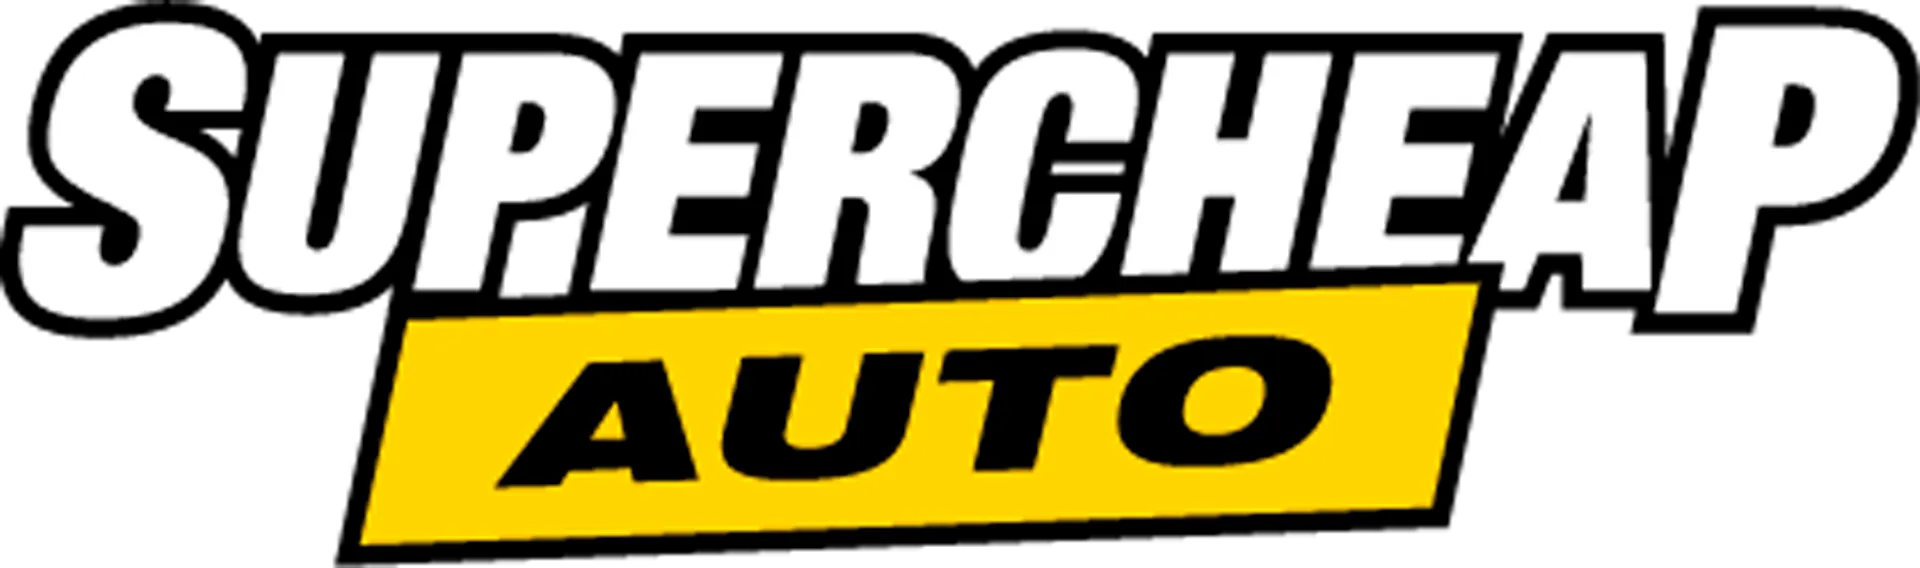 SUPERCHEAP AUTO logo. Current weekly ad